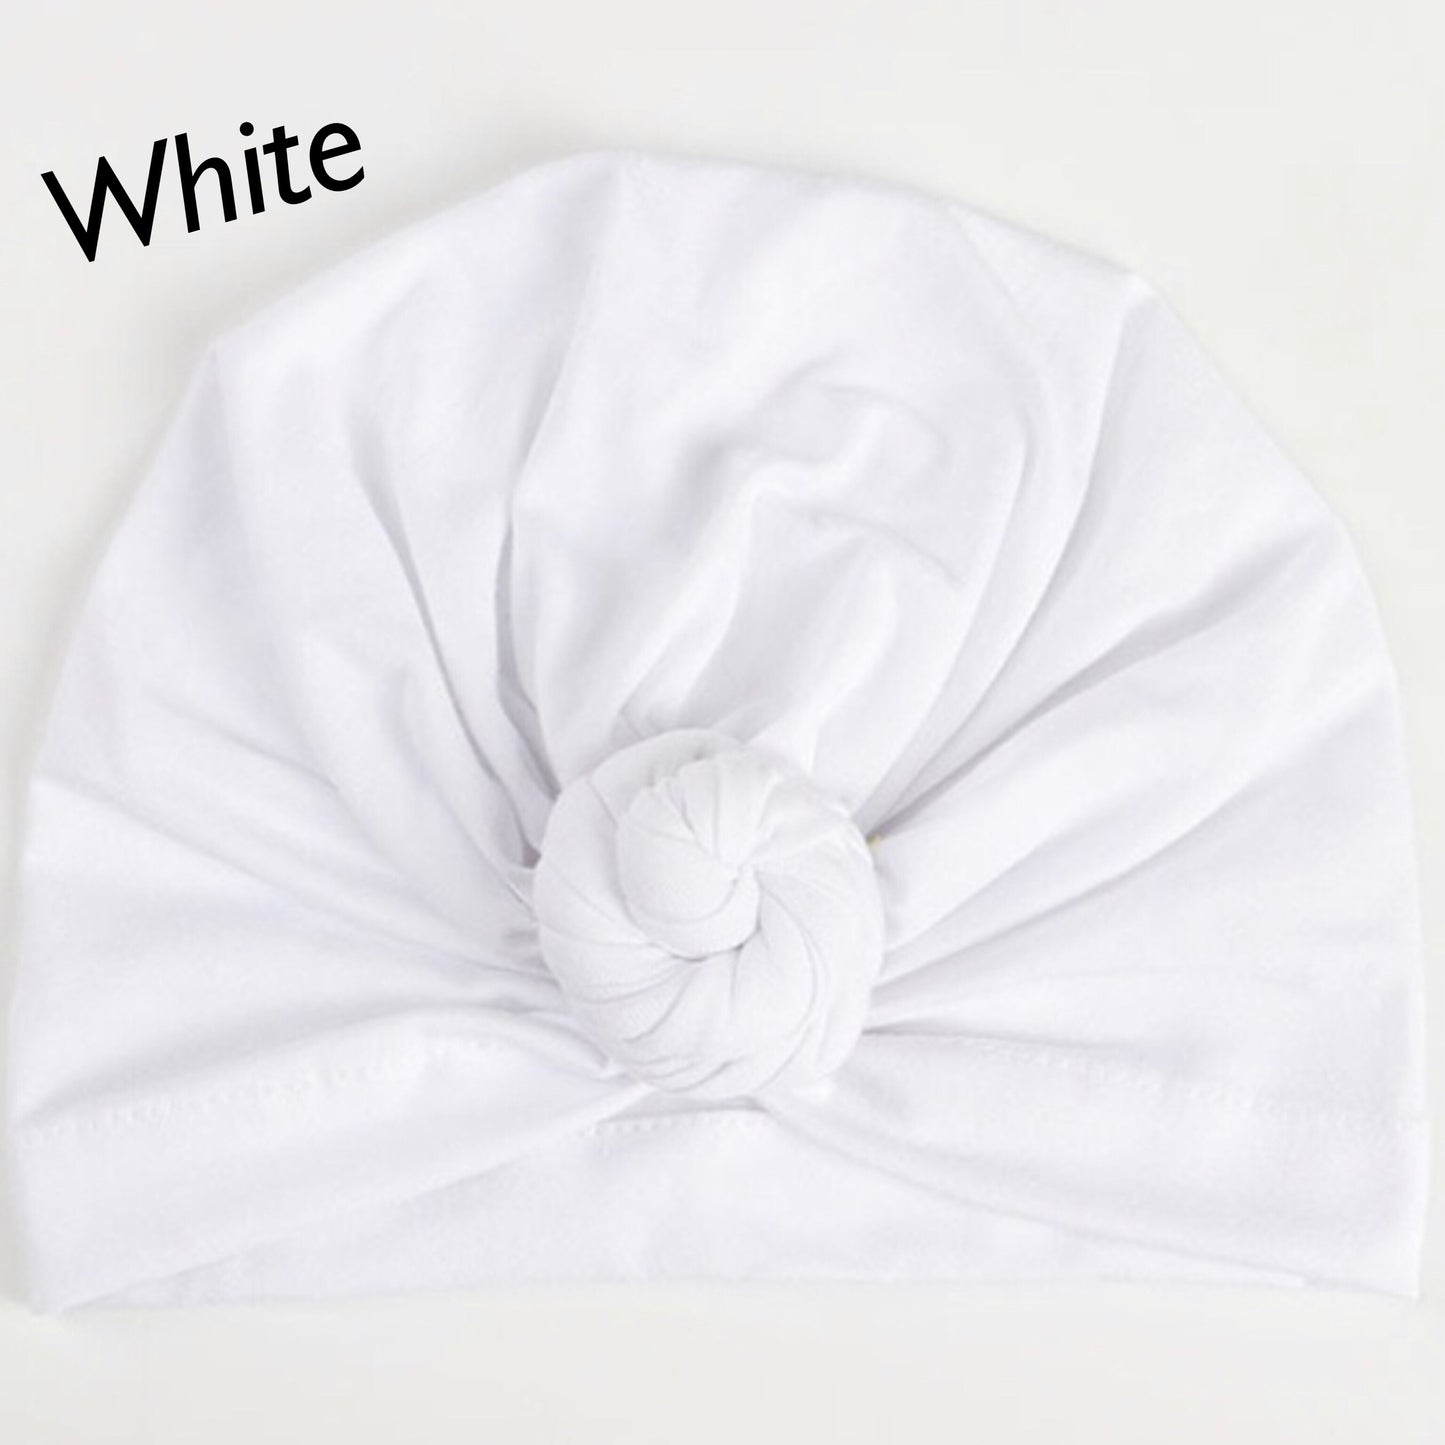 Twist Style Head Bonnet for Mom and Baby, Various Colors